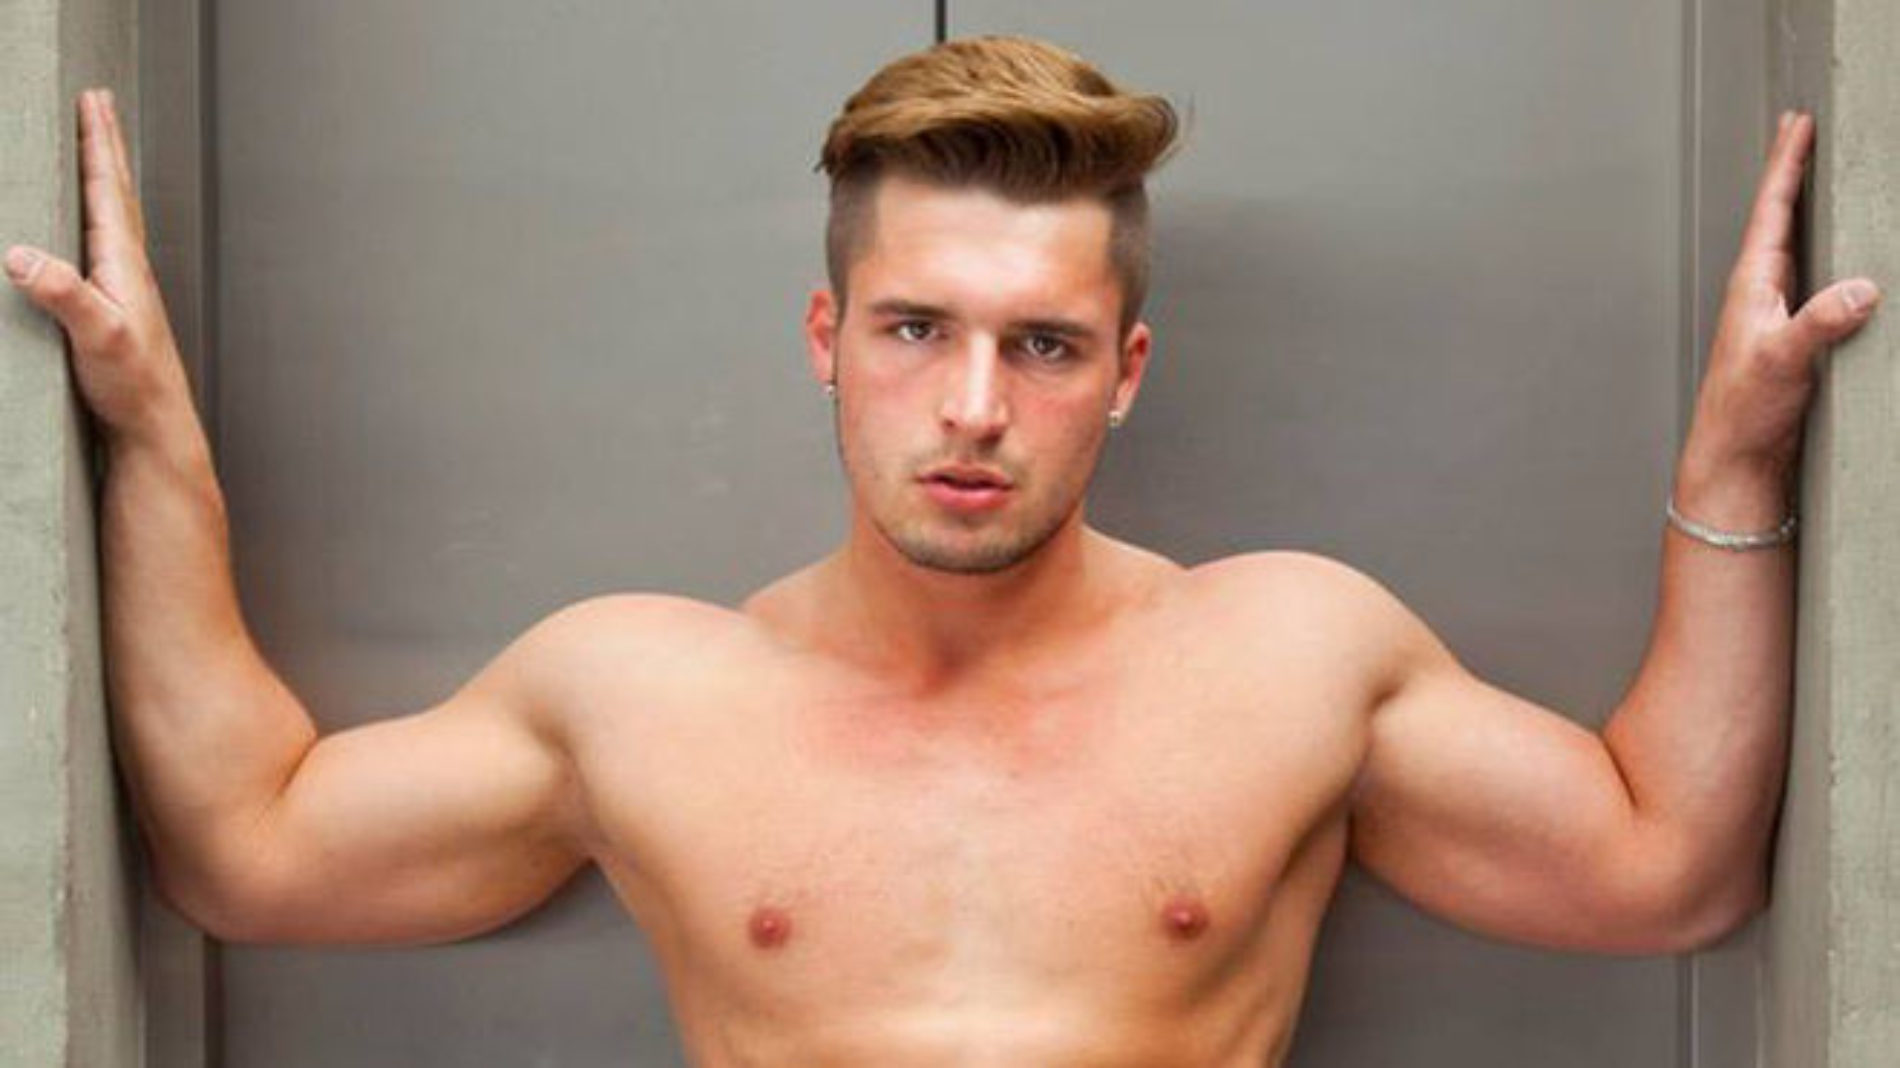 Mr. Gay World Steps Down From His Reign Due To “Personal Changes”